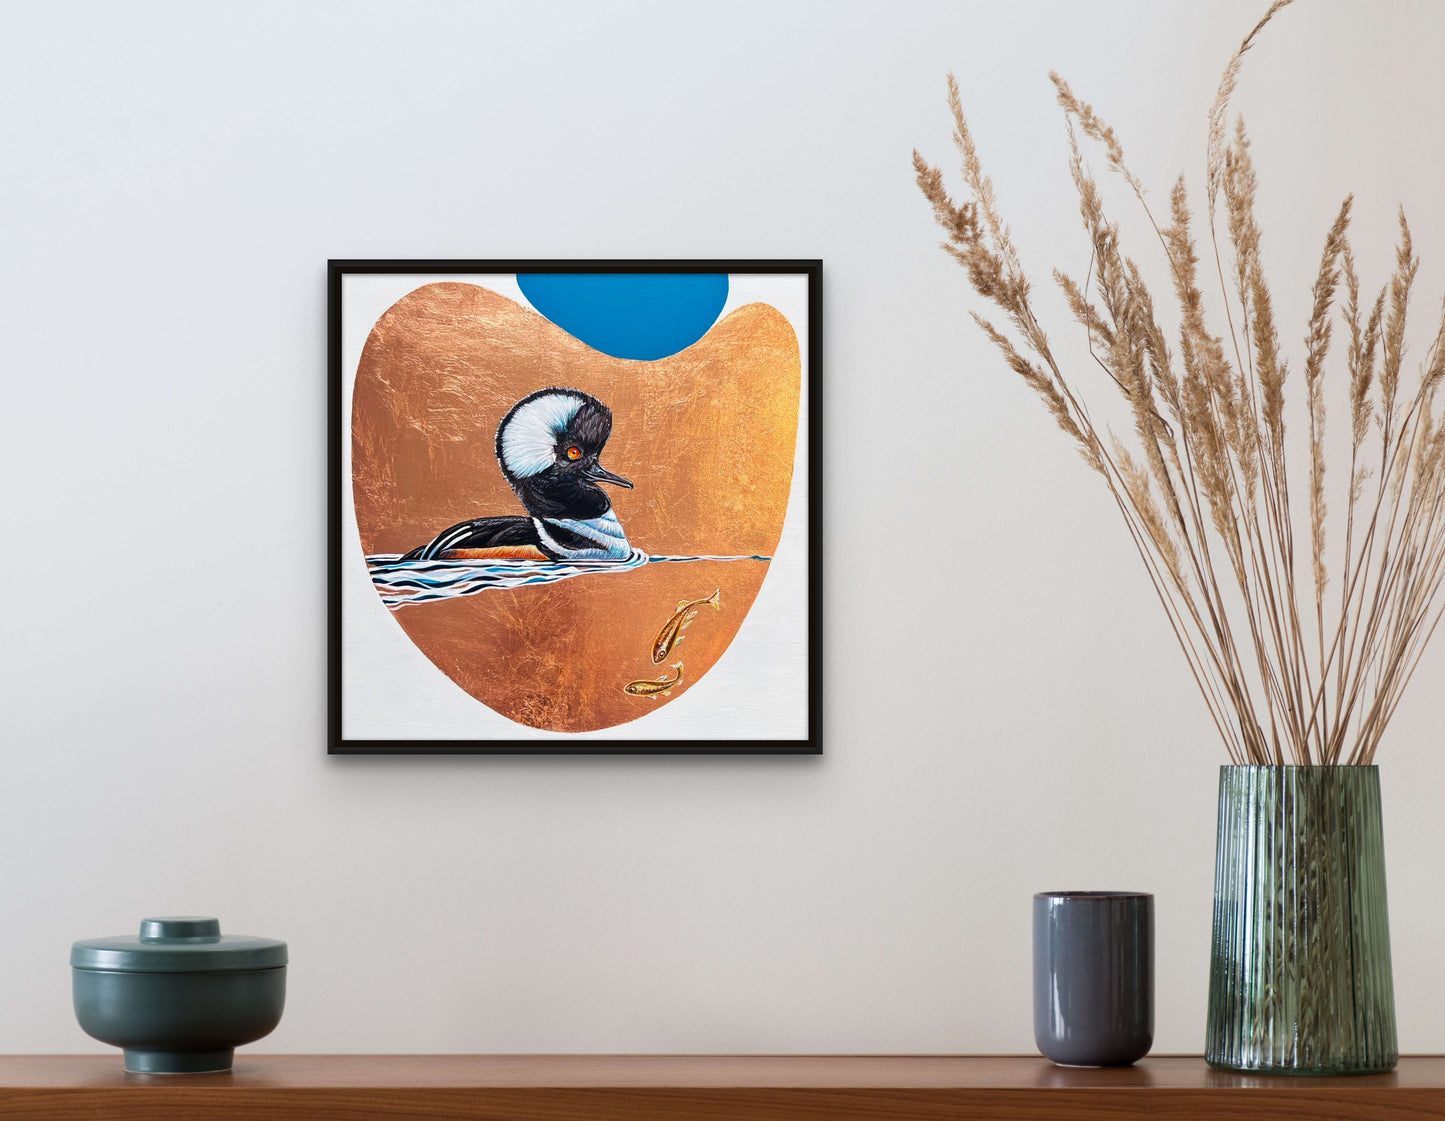 Framed waterfowl on a copper leaf background with blue sky accent. Two small fish swim nearby in situ; artist Marie Lavallee; 12"x12"